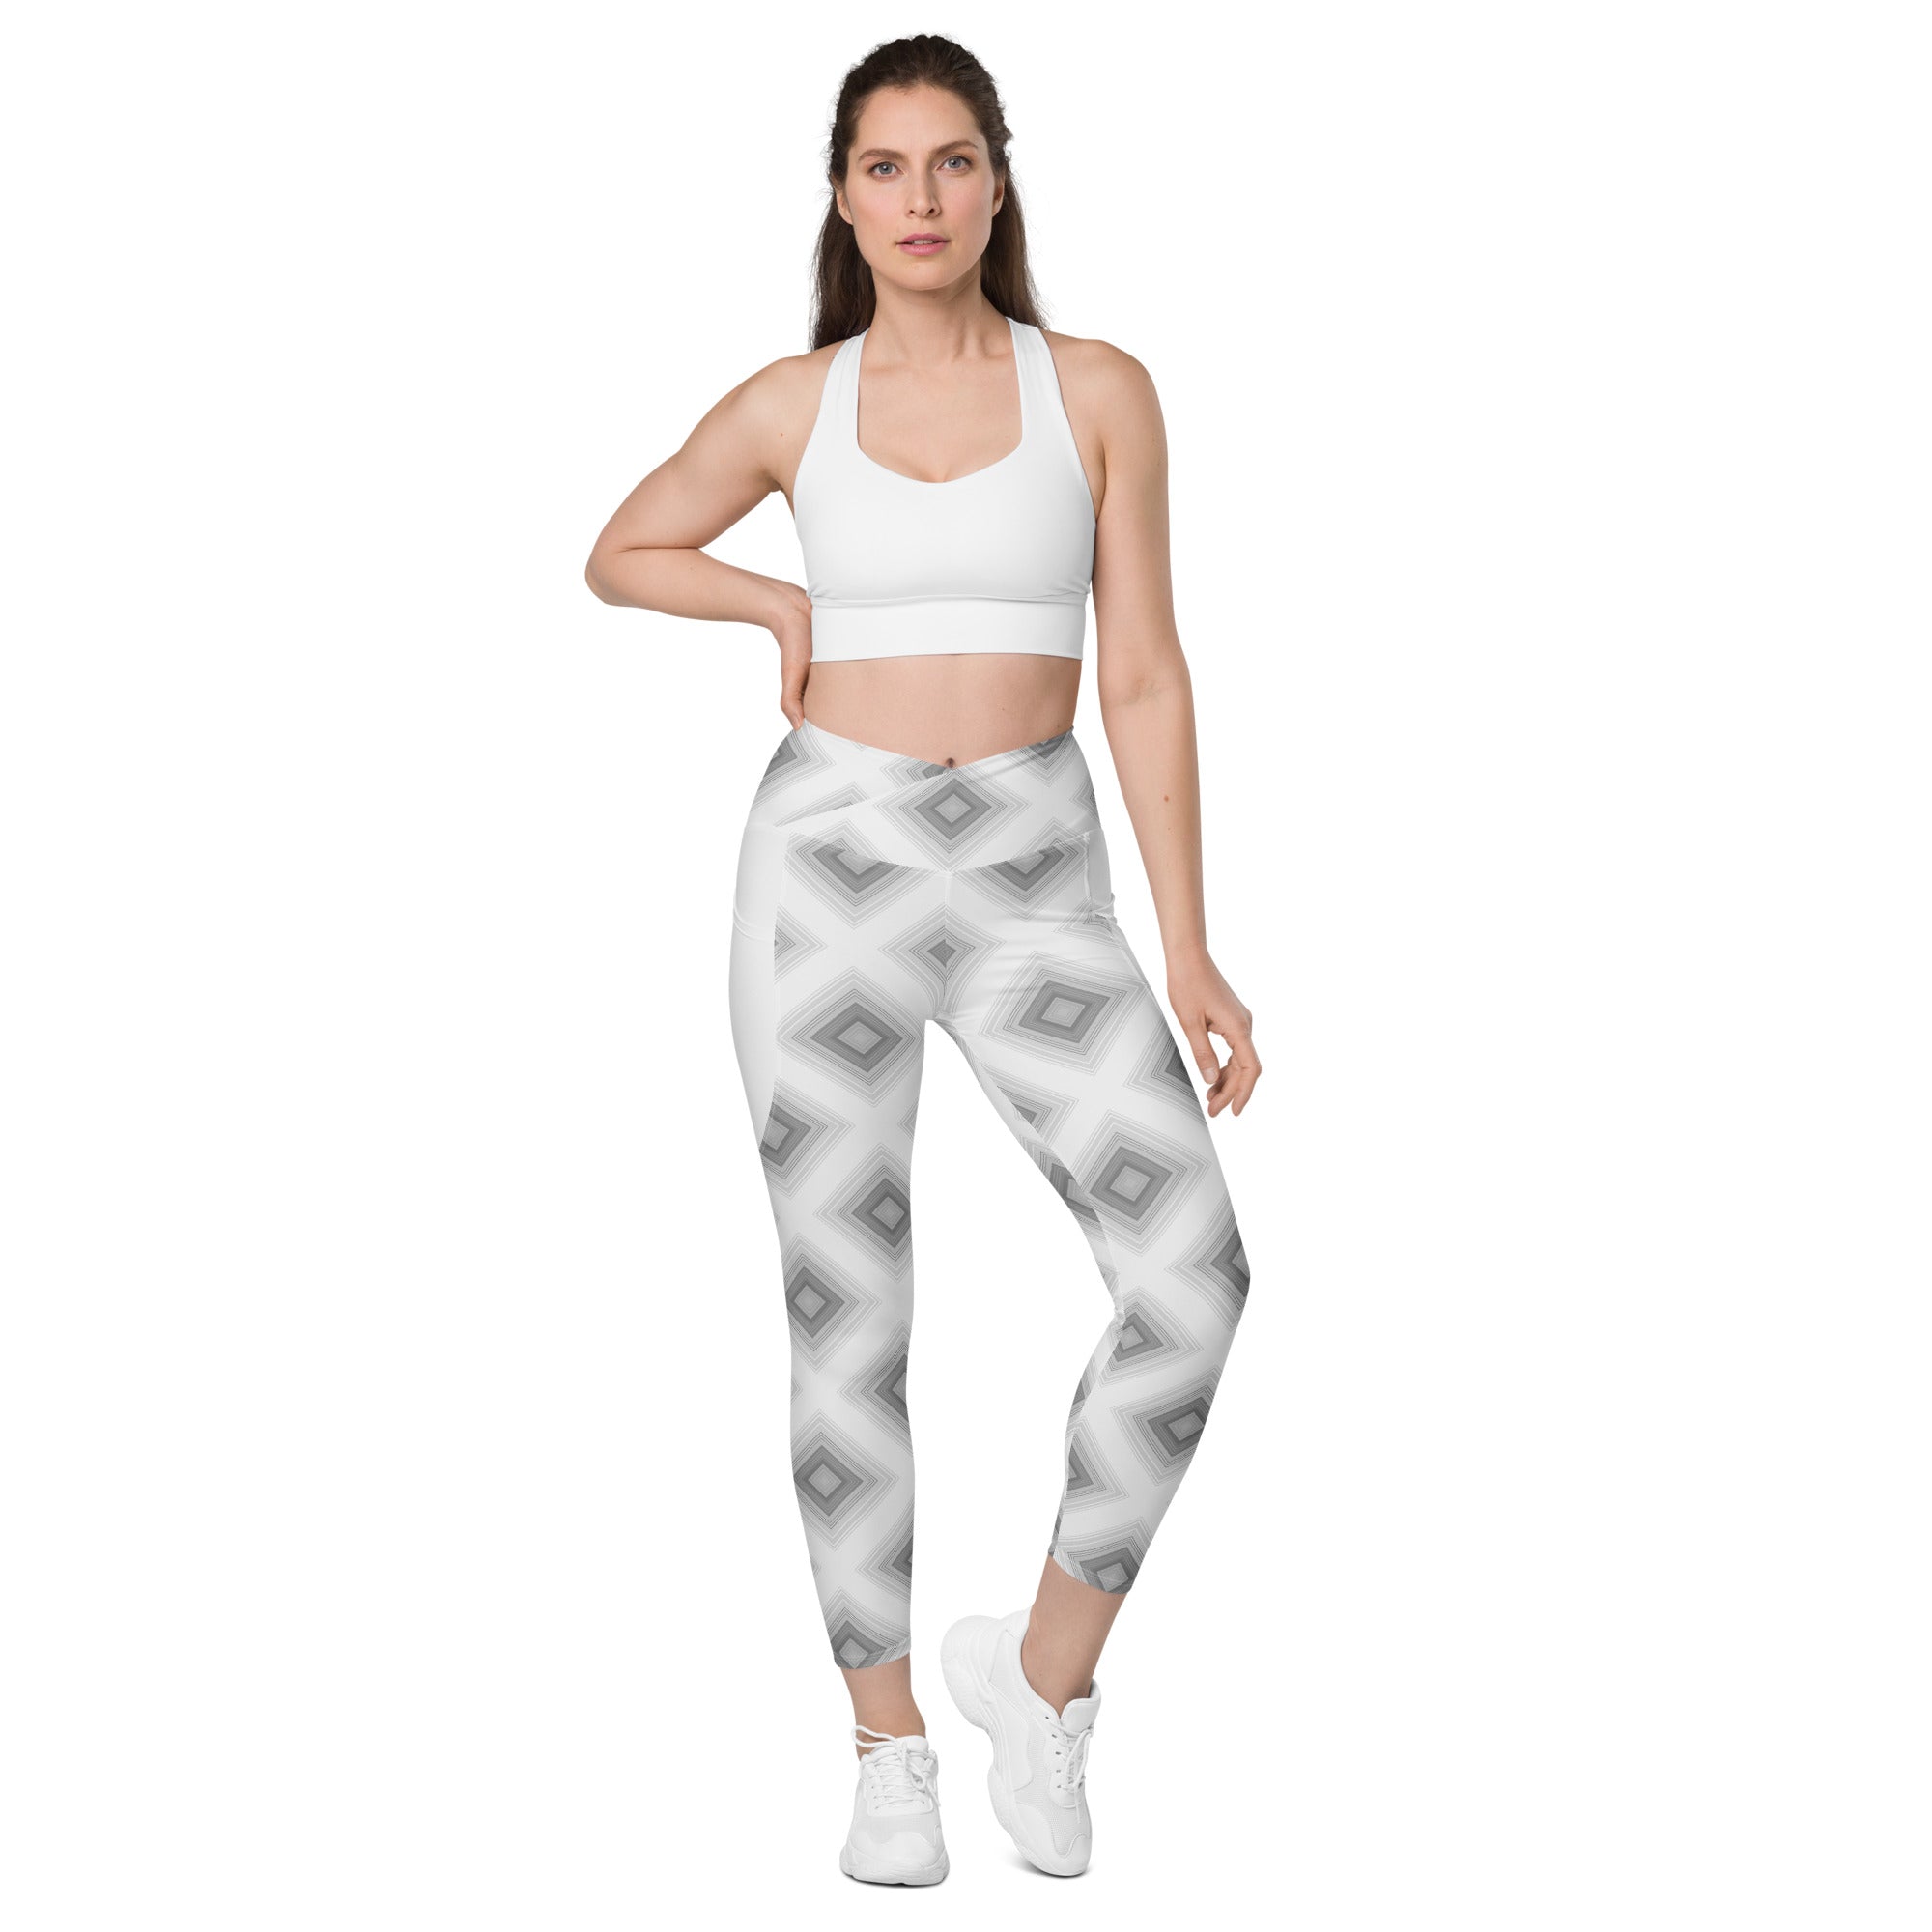 Houndstooth Harmony Crossover Leggings with side pockets detail